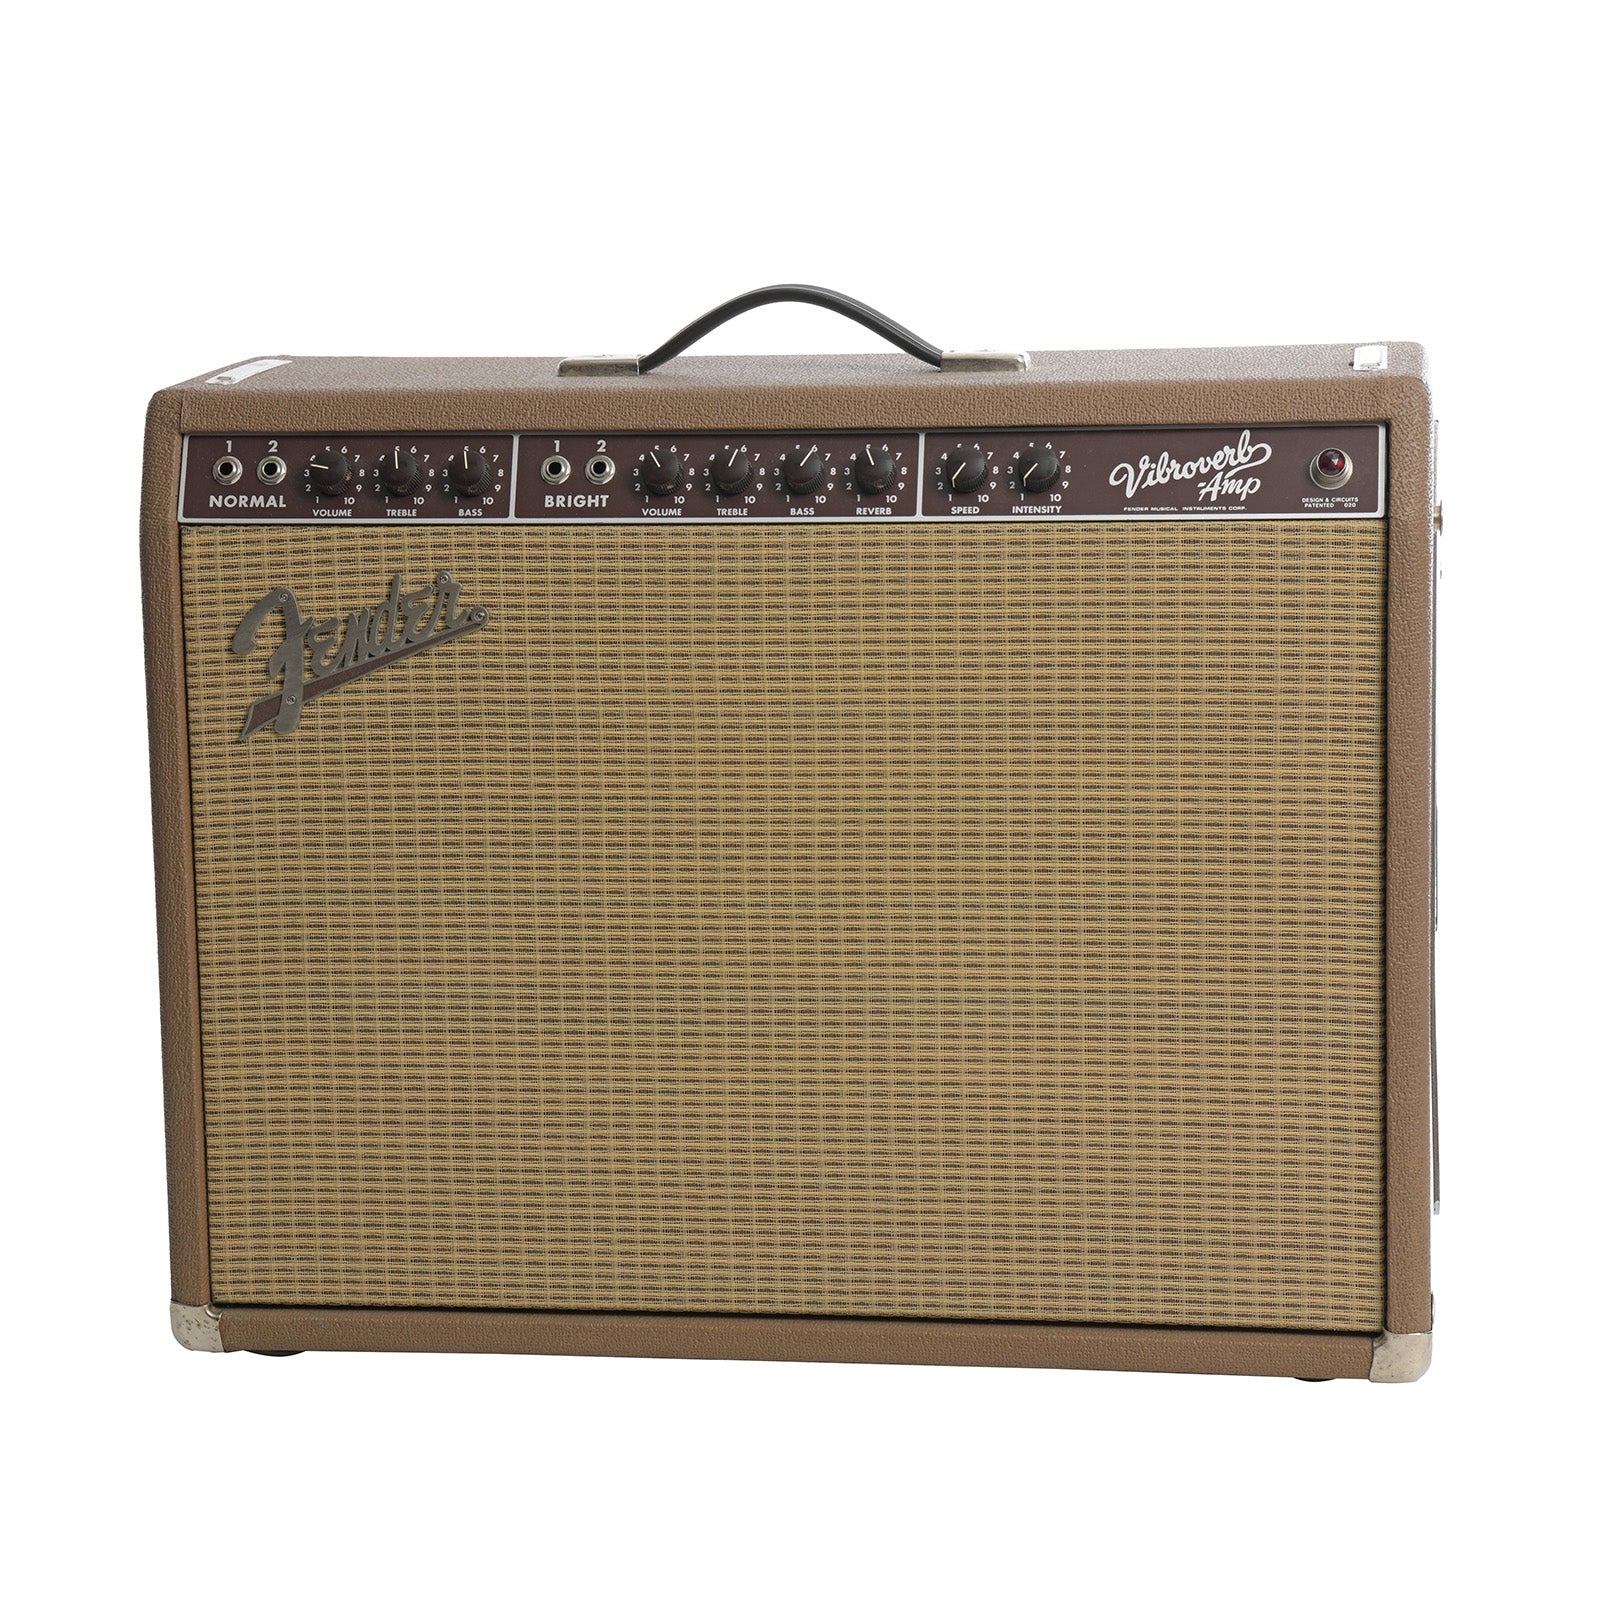 Full front and side of Fender '63 Vibroverb Reissue Combo Amp (1995)